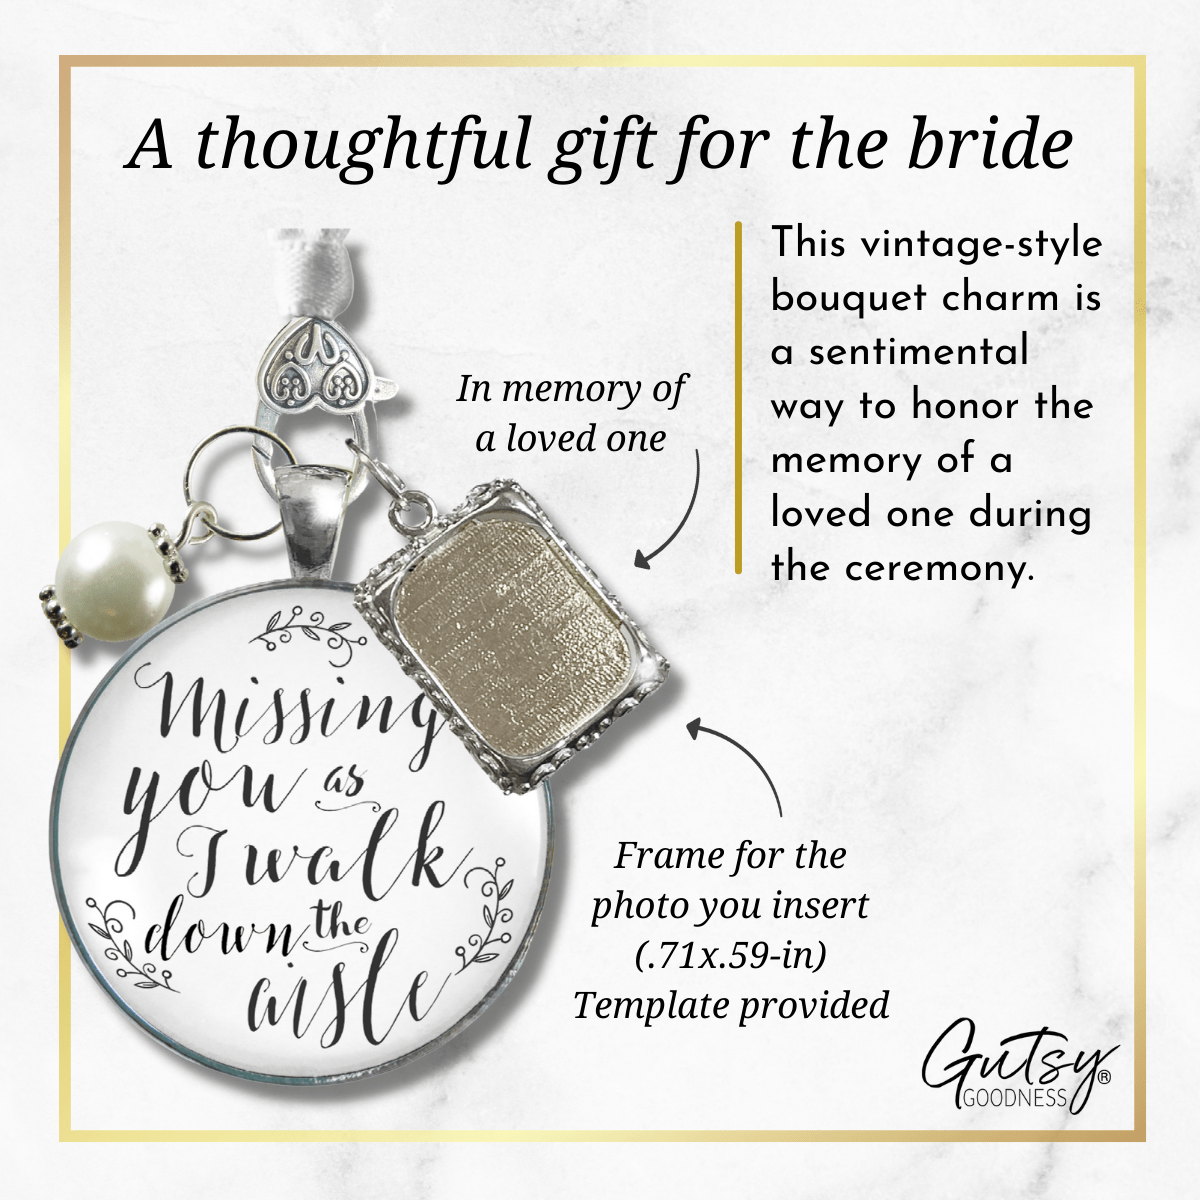 Wedding Bouquet Memorial Charm Missing You White Silver Tone Memory Photo Jewelry - Gutsy Goodness Handmade Jewelry Gifts